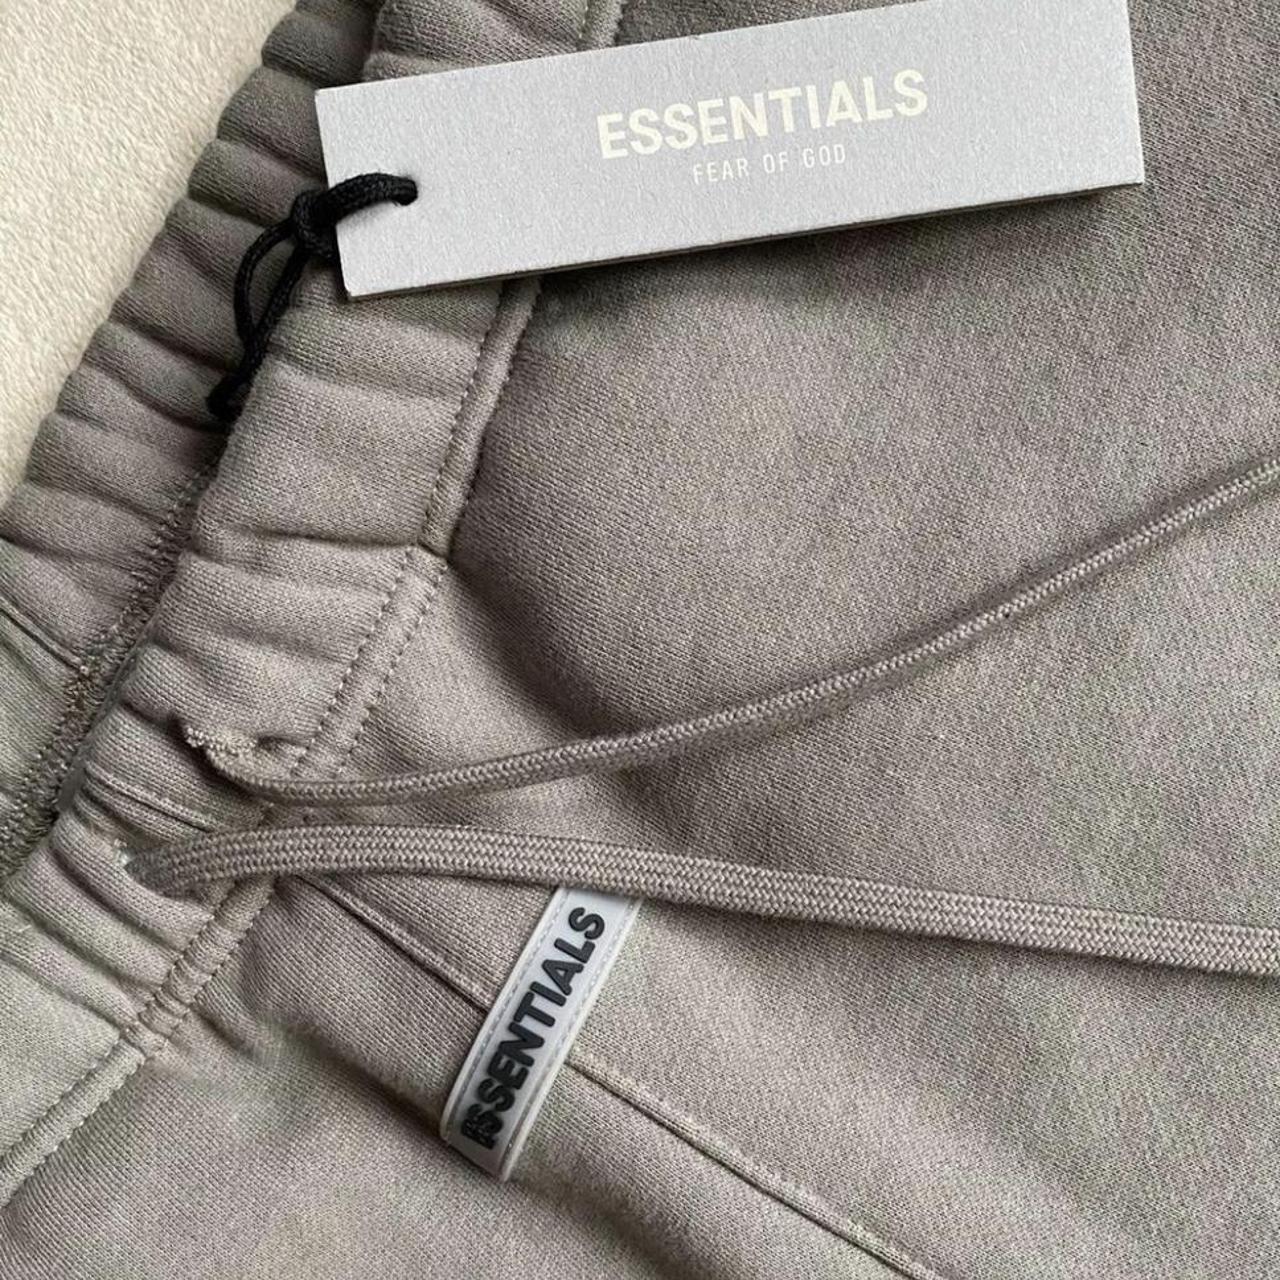 FOG Essentials FULL SETS AVAILABLE TO PRE ORDER. - Depop